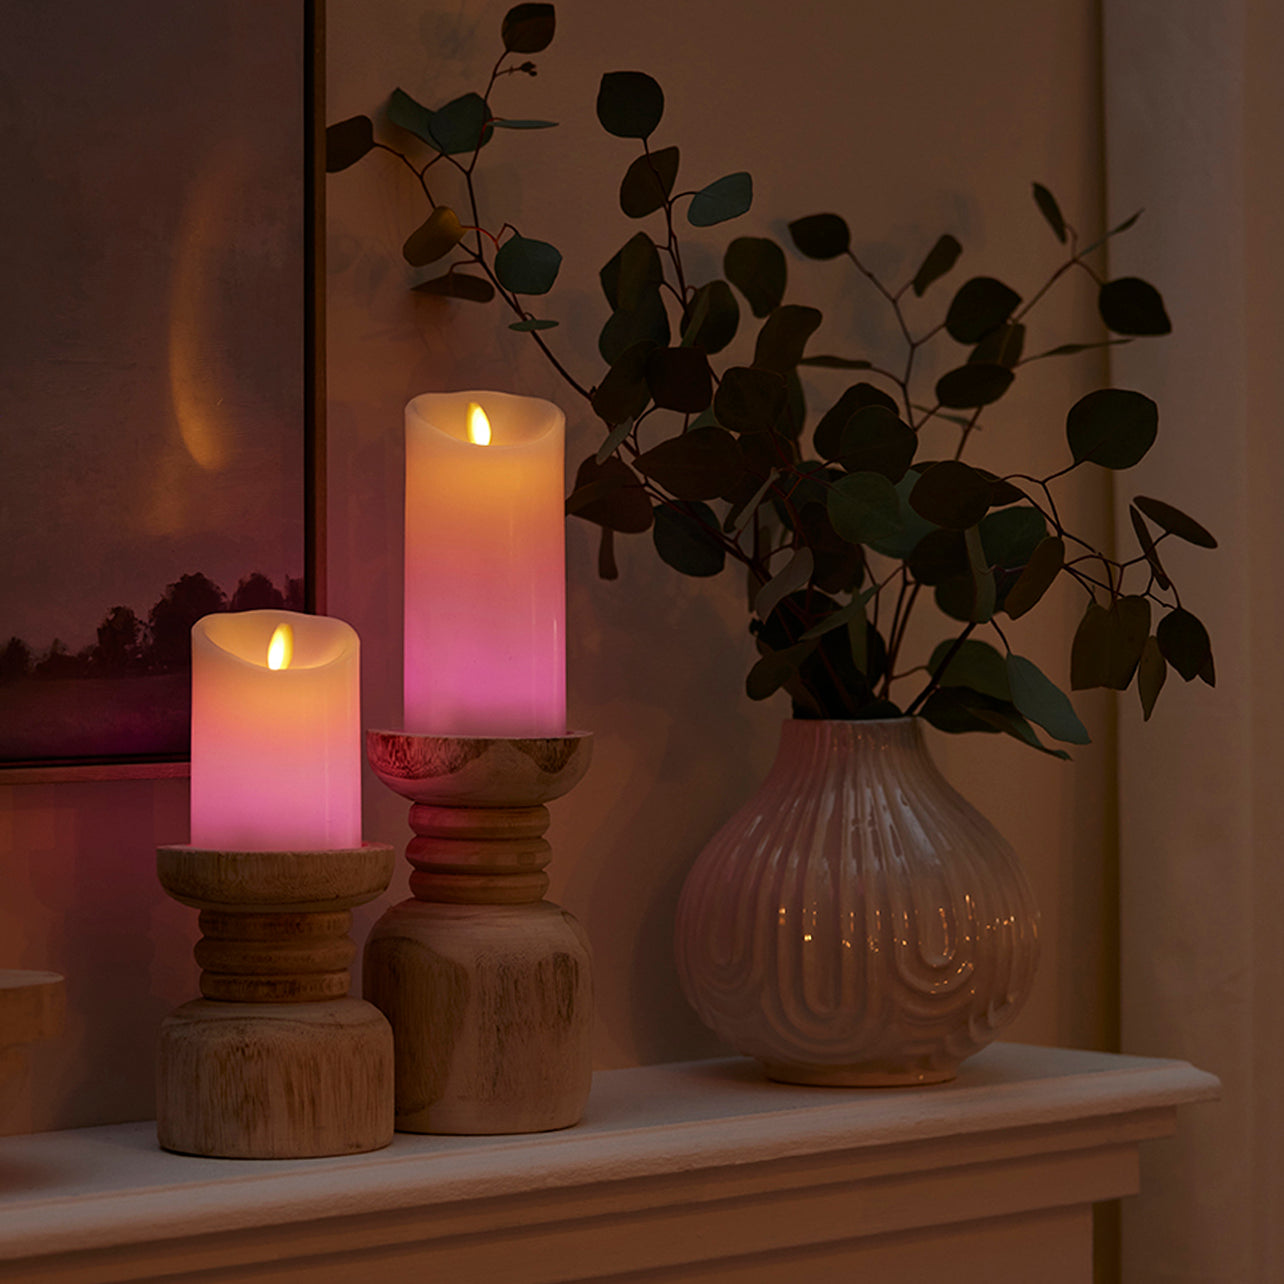 Flameless Color Changing Candle Pillar with Remote - Scallop Top - 3" Width